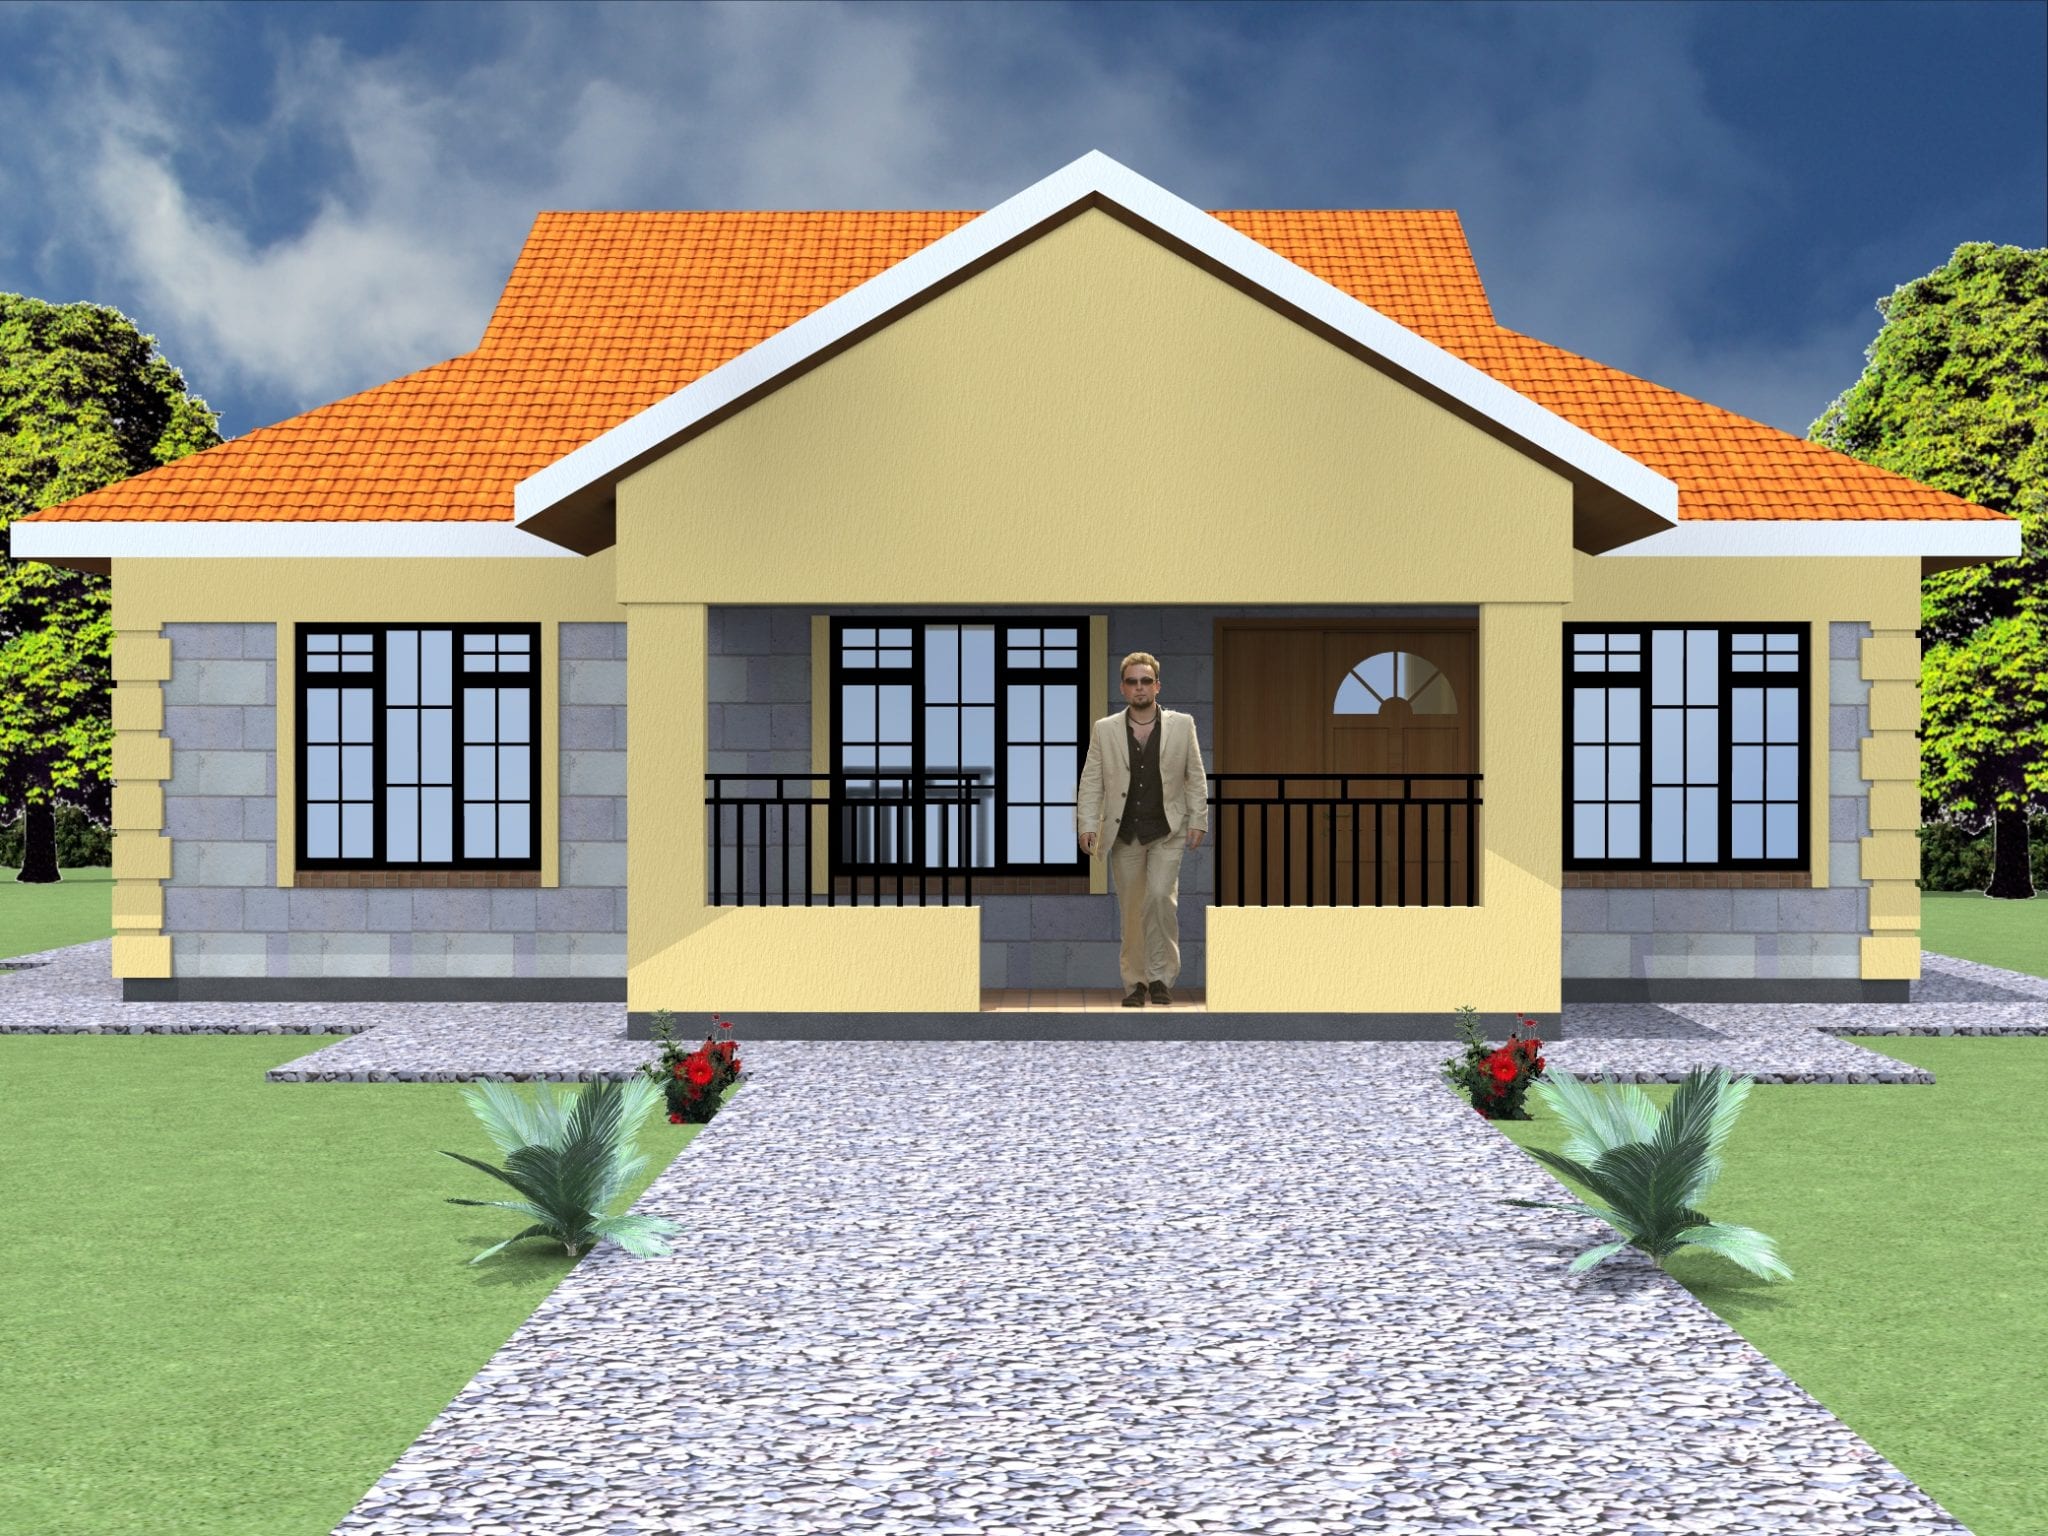 Simplified Plan 3 Bedroom House Design | HPD Consult